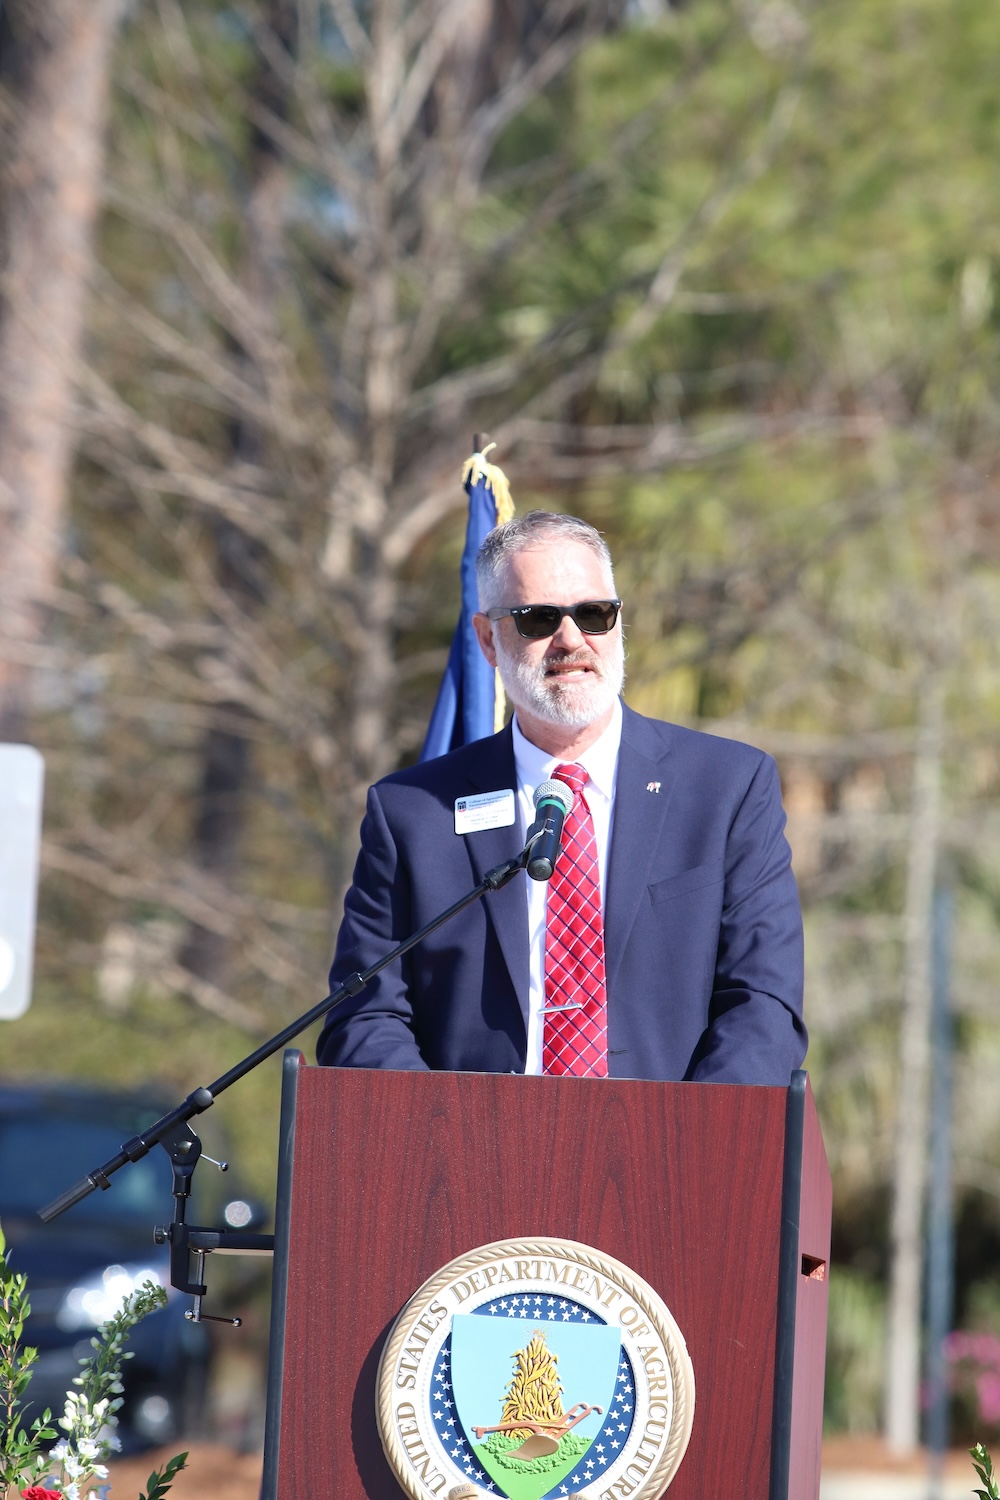 A man with a beard and sunglasses wearing a dark blue suit stands at a podium.